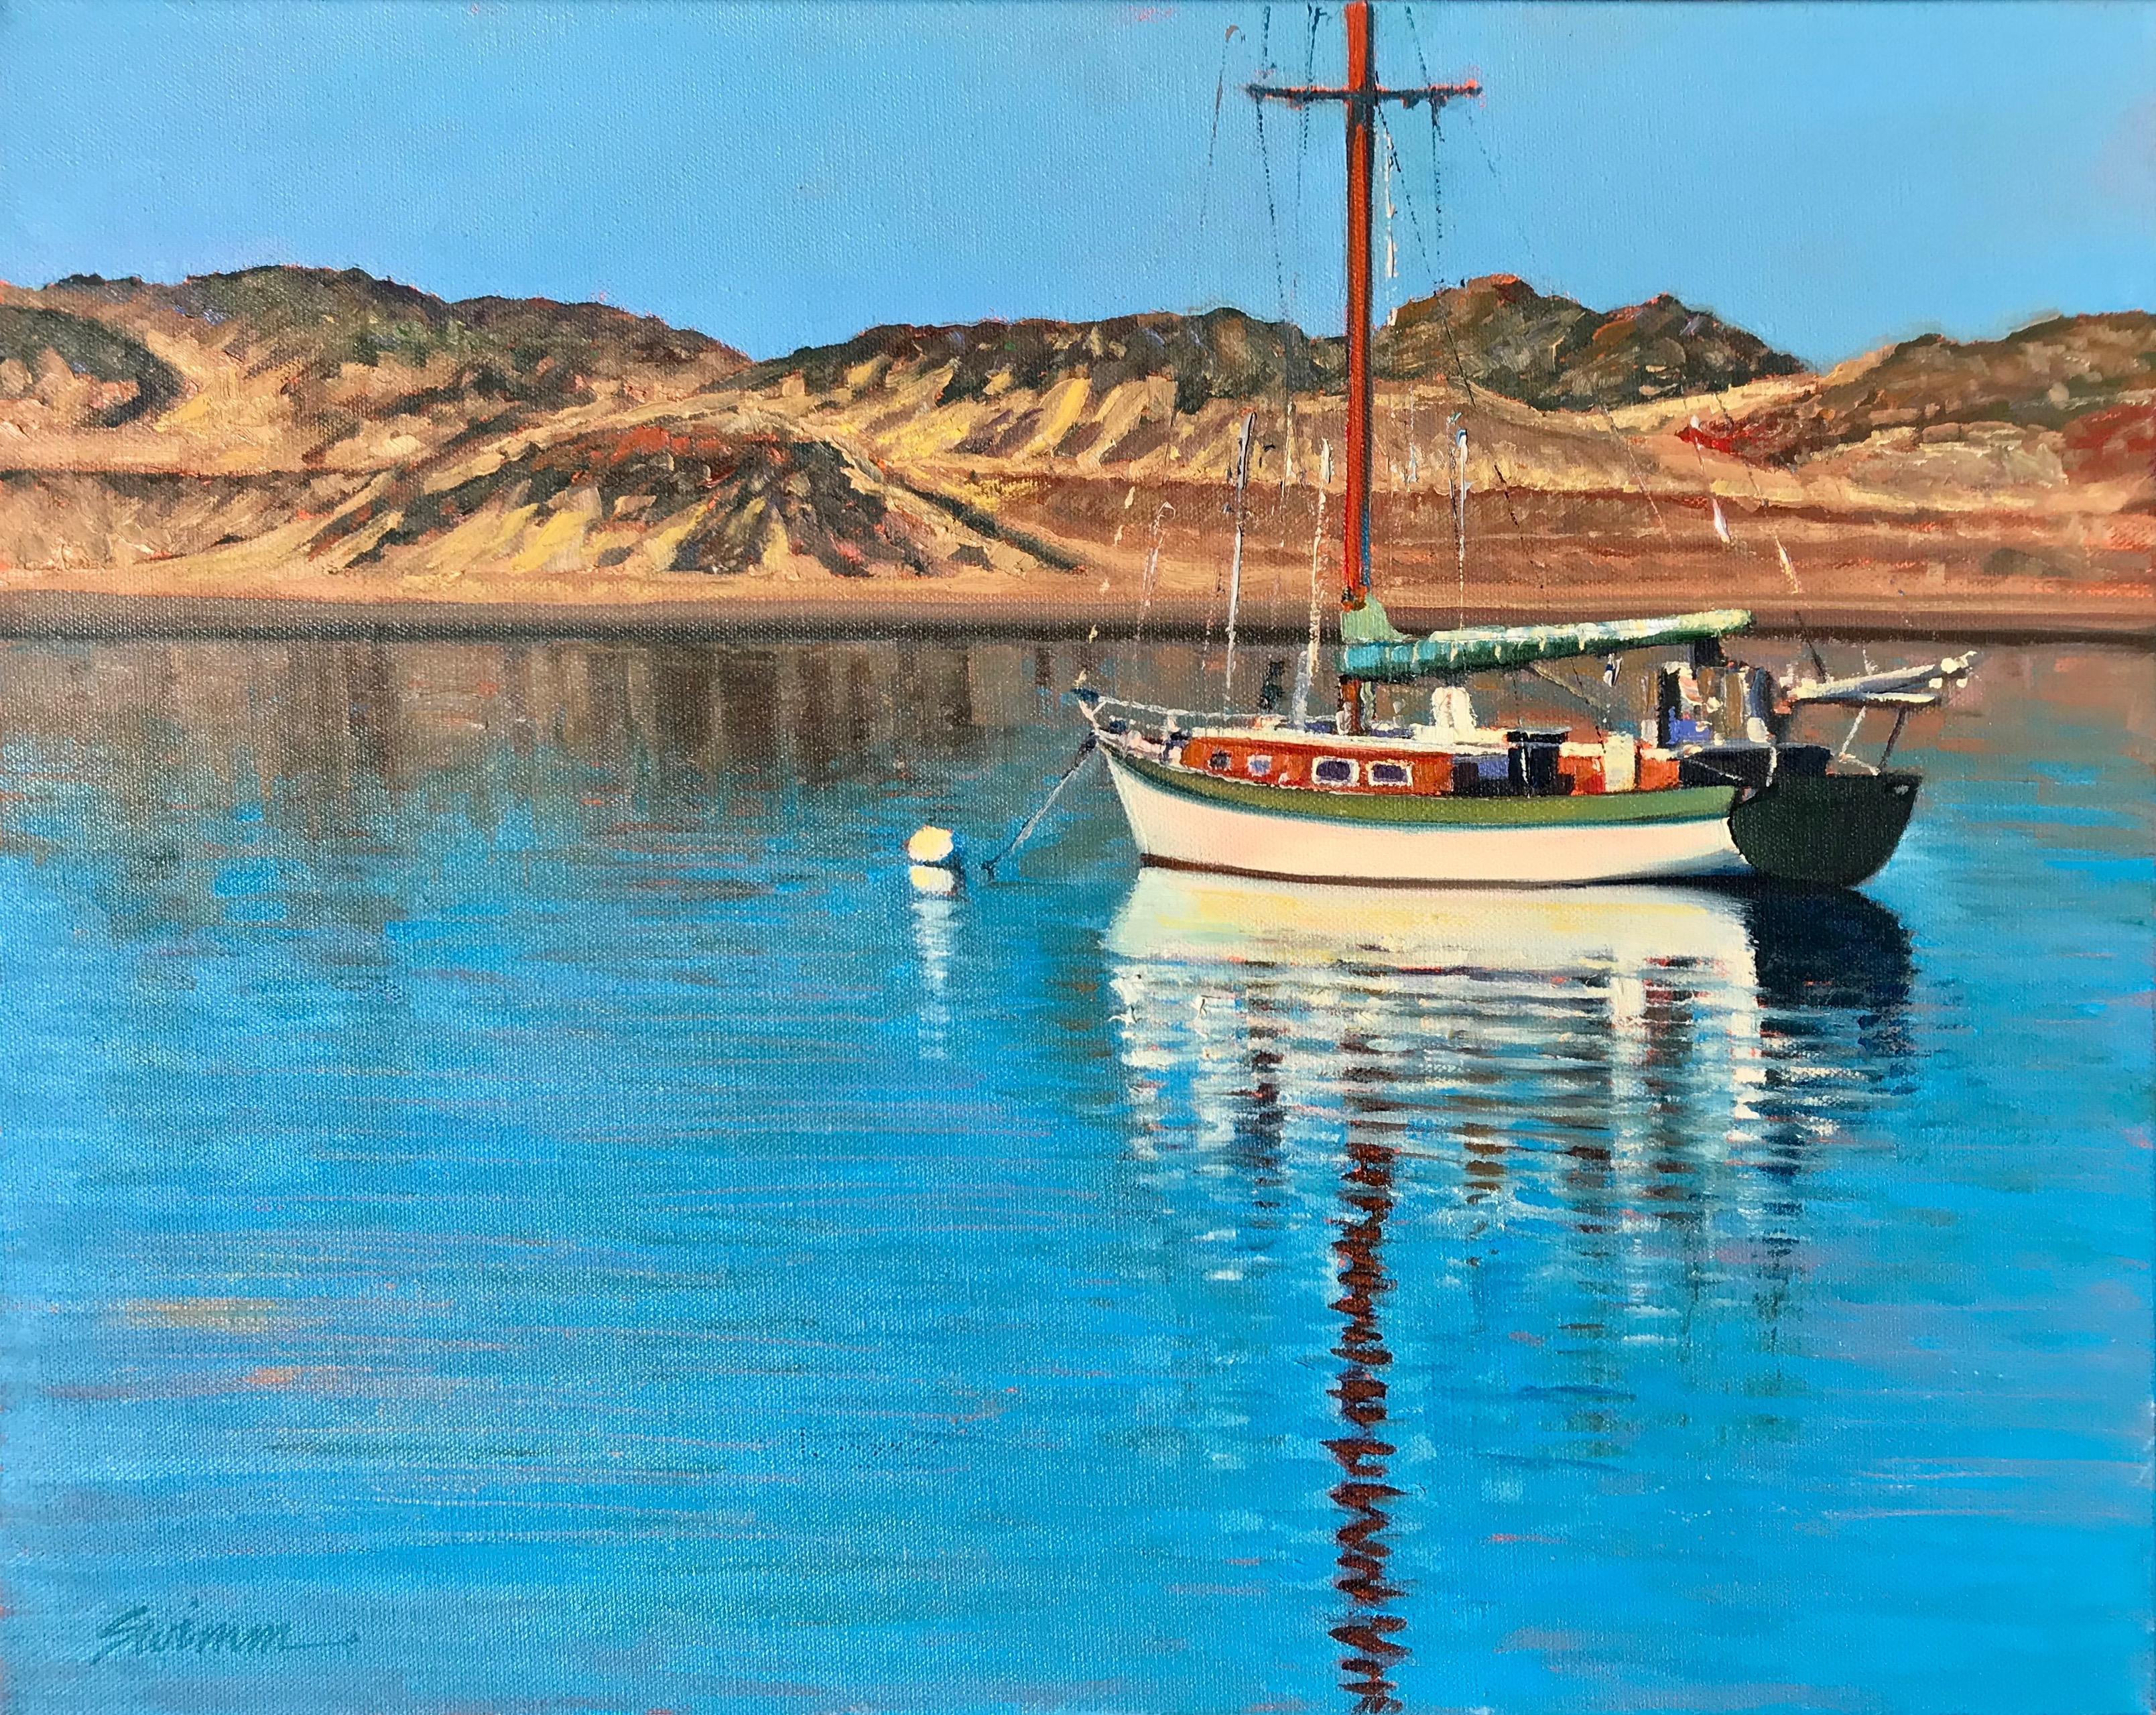 Tom Swimm Landscape Painting -  "Morro Bay Reflections" Sailboat In Harbor With Rippling Water Reflections